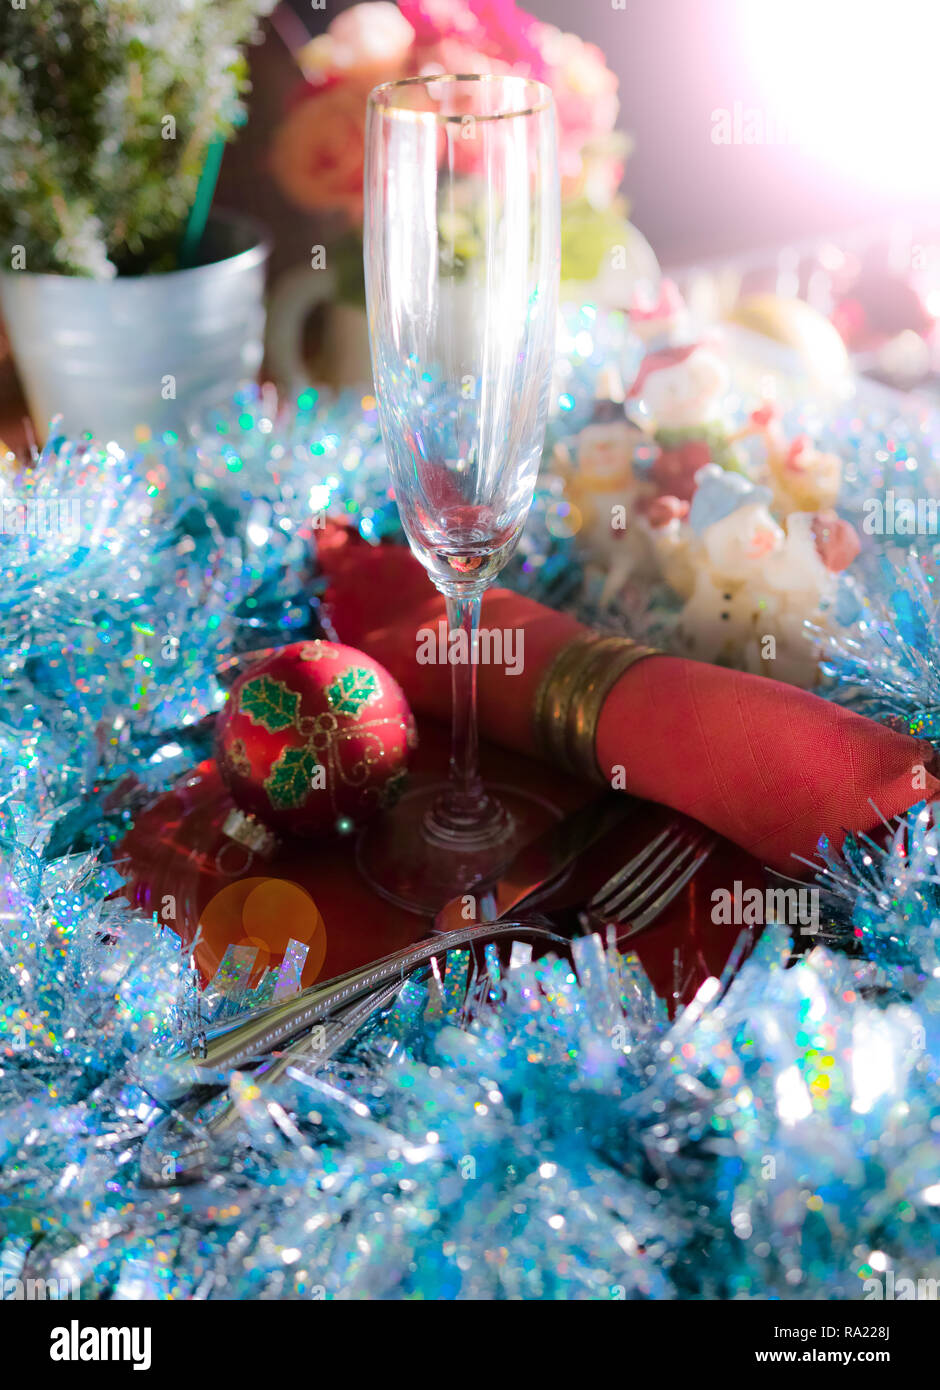 A richly decorated table for the Christmas party or New Year's Eve. Stock Photo